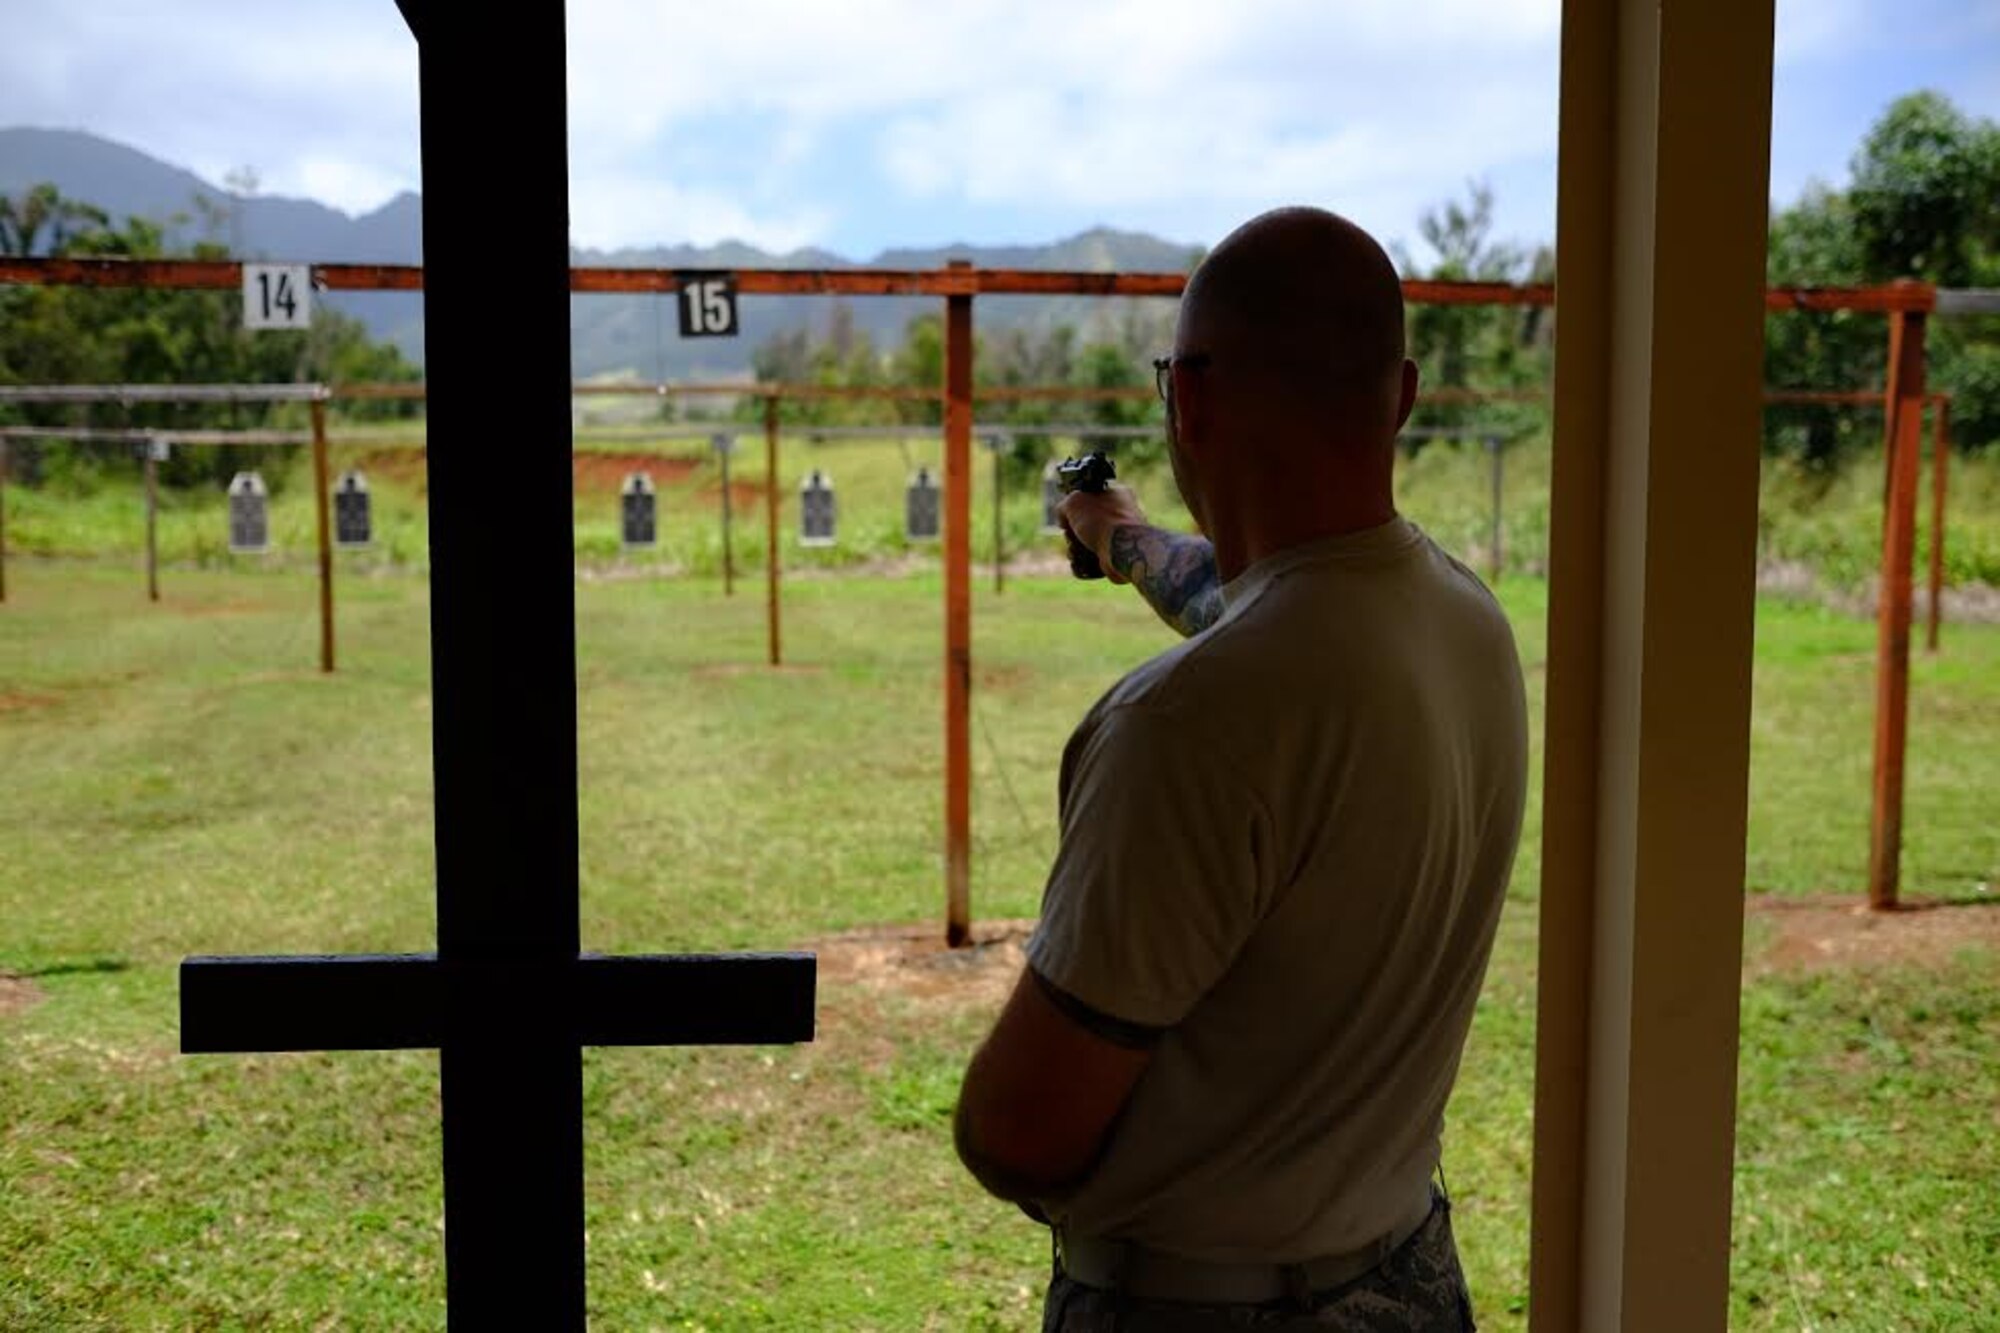 Master Sgt. Erich Freundner, 690th Cyberspace Operations Squadron, fires his Beretta M9 pistol during the Excellence in Competition pistol event, held 29-31 March, at the 647th SFS Combat Arms Firing Range on Schofield Barracks. (U.S. Air Force photo by Staff Sgt. Christopher Stoltz/Released)